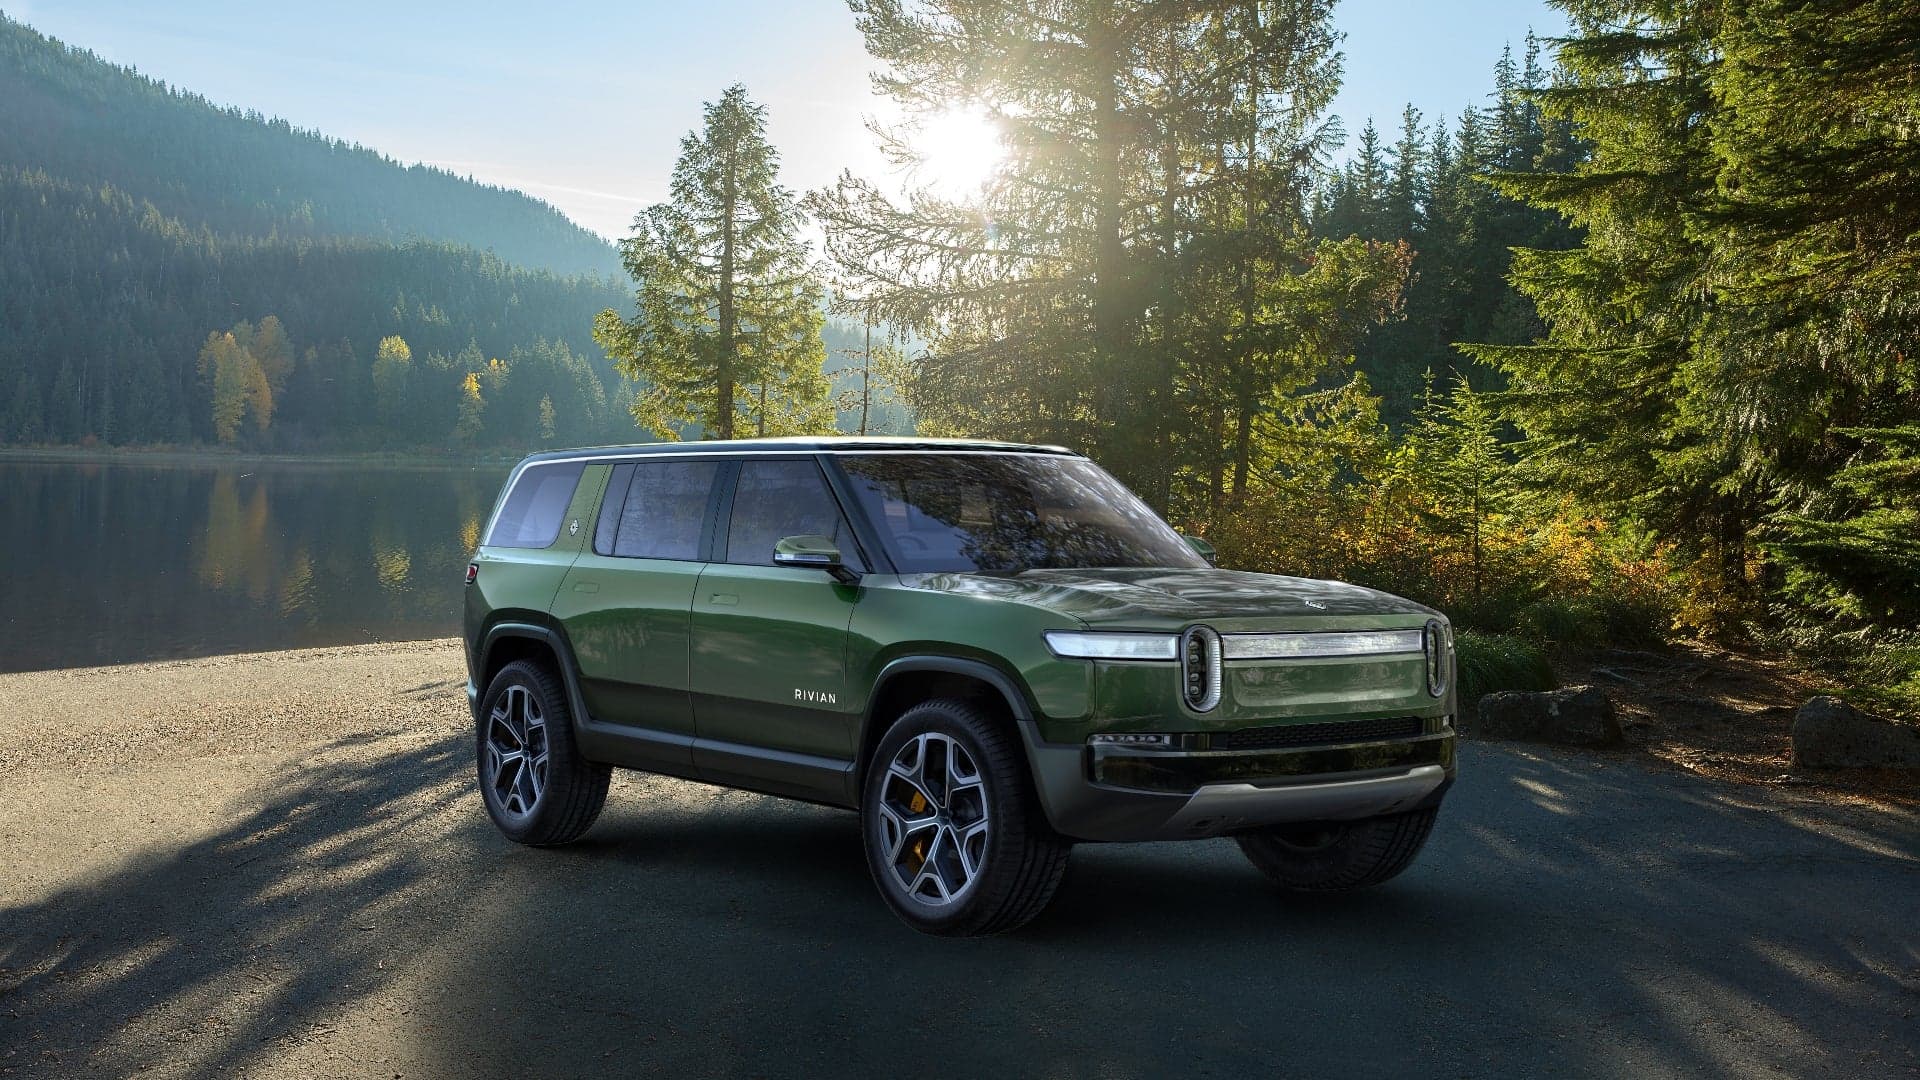 The 754-HP Rivian R1S Electric SUV Could Be a Green Off-Roader for the Family